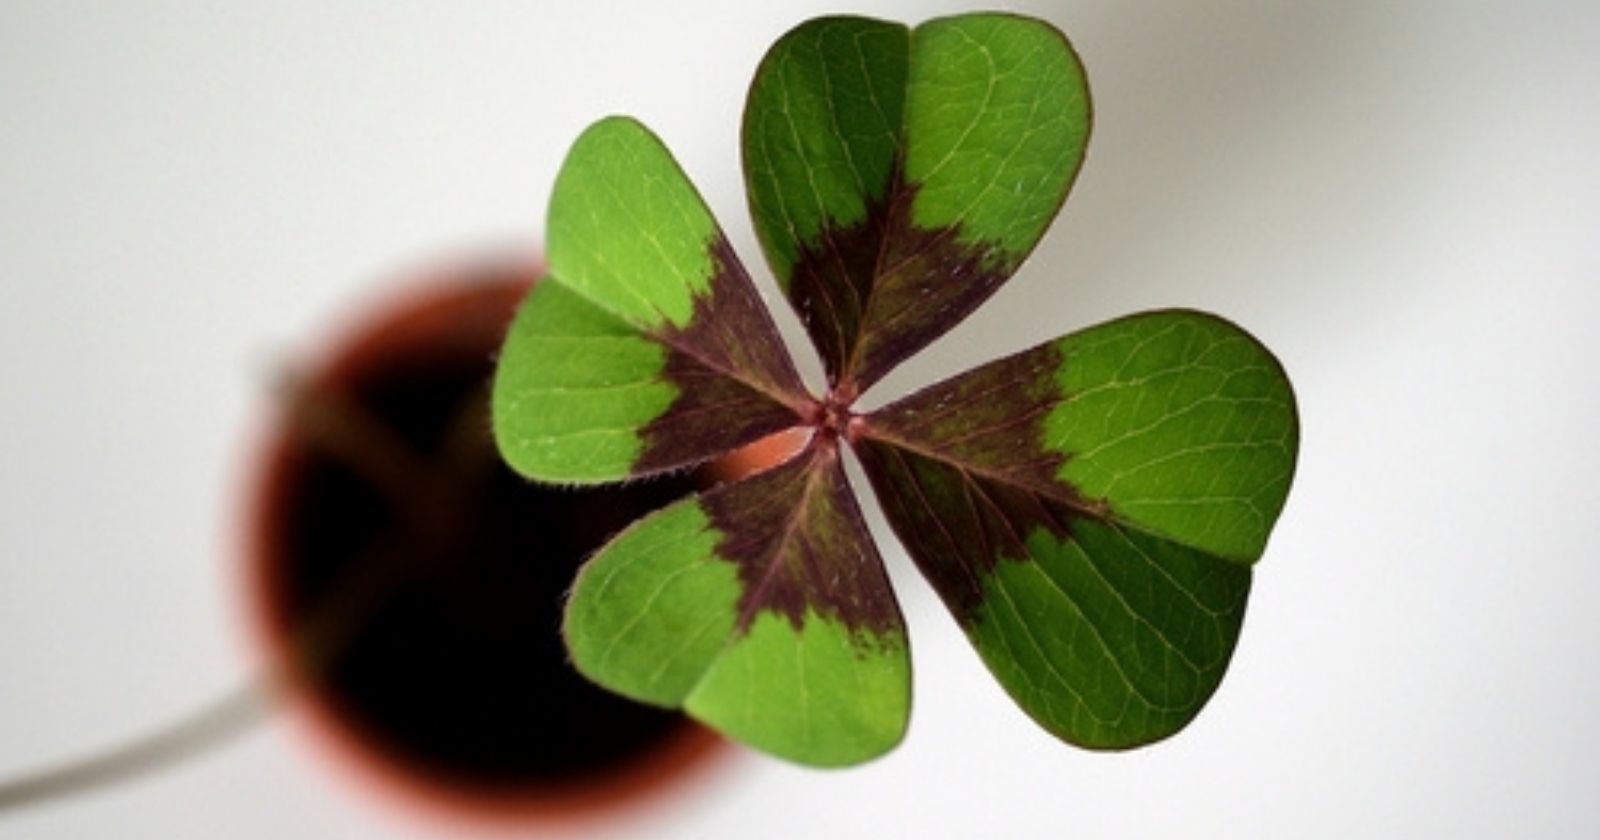 Friday the 13th: This man is the world's only producer of four-leaf clover